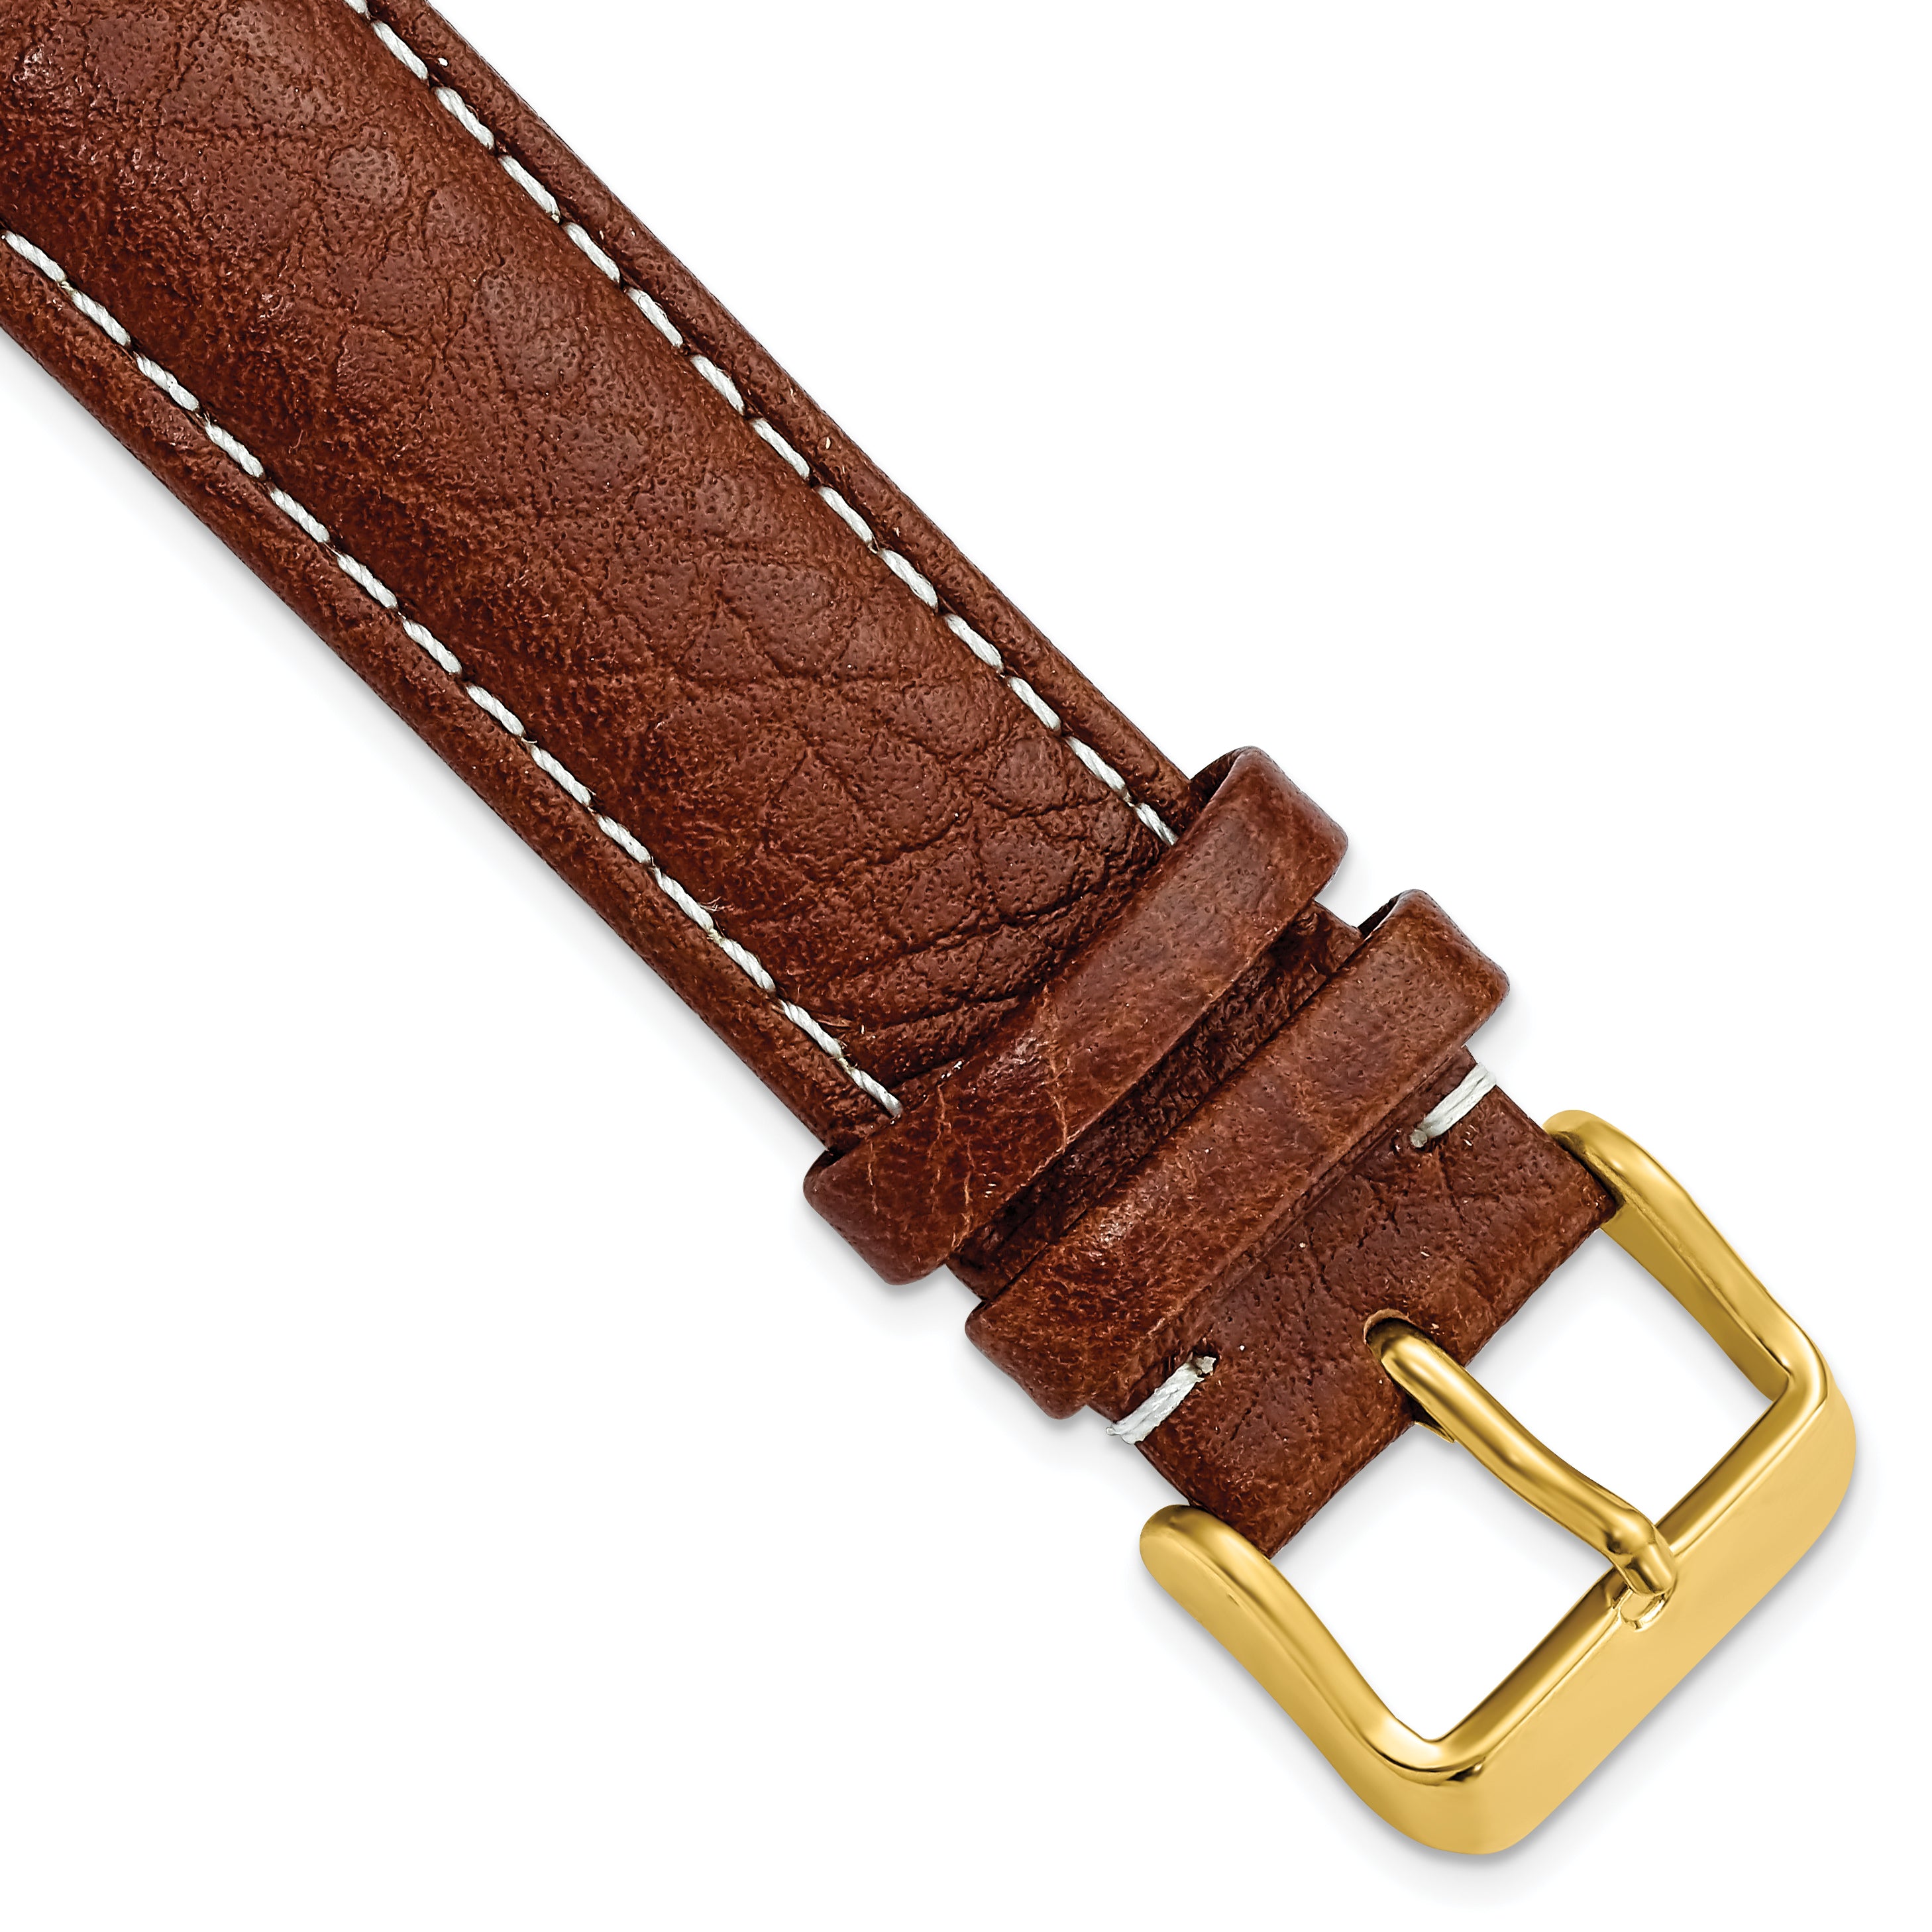 DeBeer 20mm Havana Sport Leather with White Stitching and Gold-tone Buckle 7.5 inch Watch Band